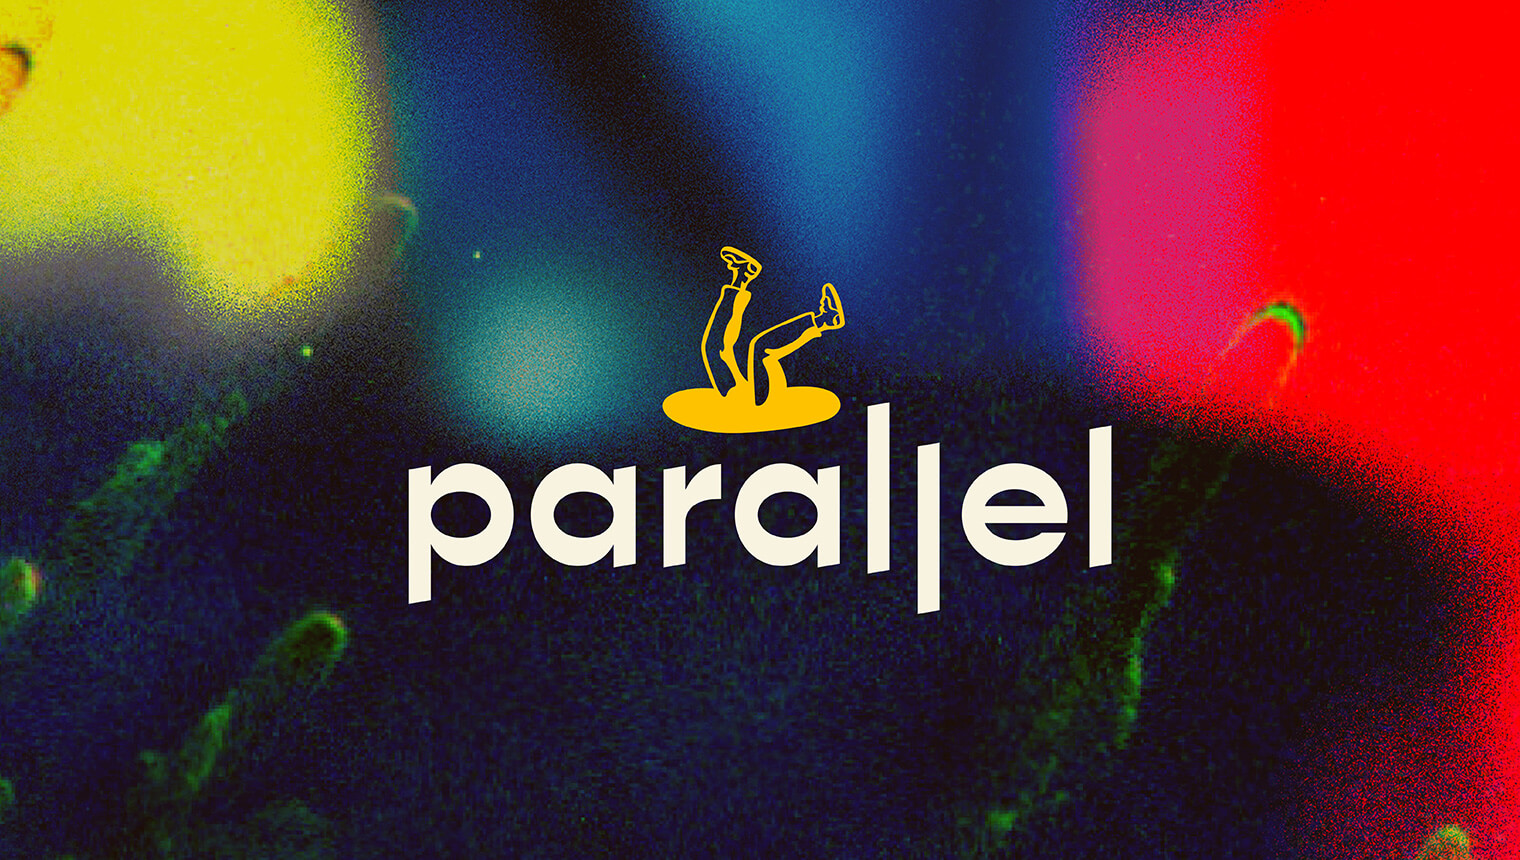 Brand design portfolio cover image for Parallel that contains a spacey-textured image with a noisy primary-coloured gradient overlaying. In the centre is the Parallel logo- a simple sans serif logotype with a small yellow illustrative icon of a pair of legs falling into a hole.